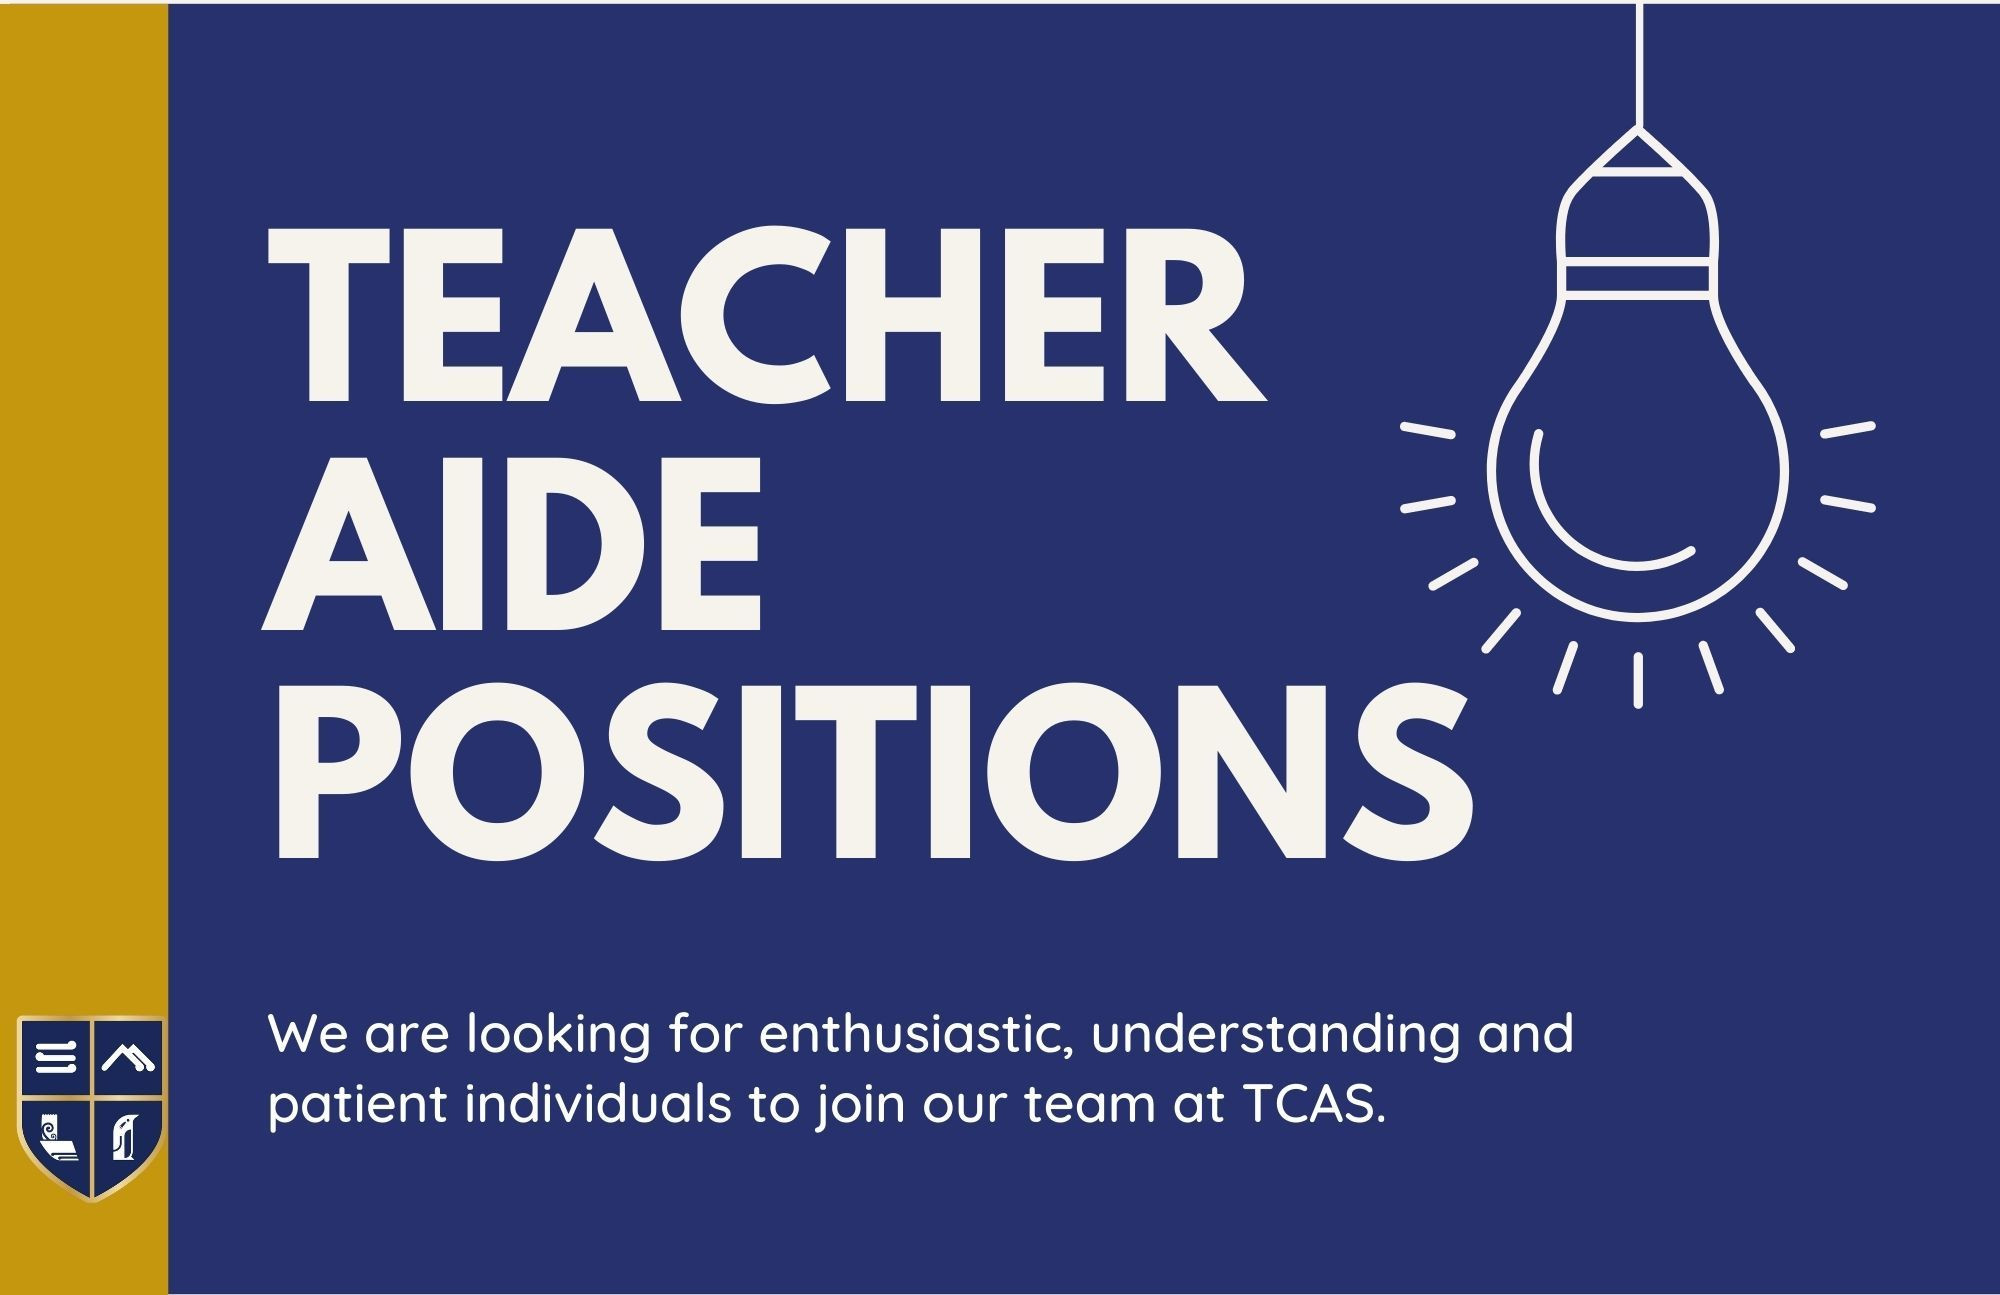 Situations Vacant - Teacher Aides